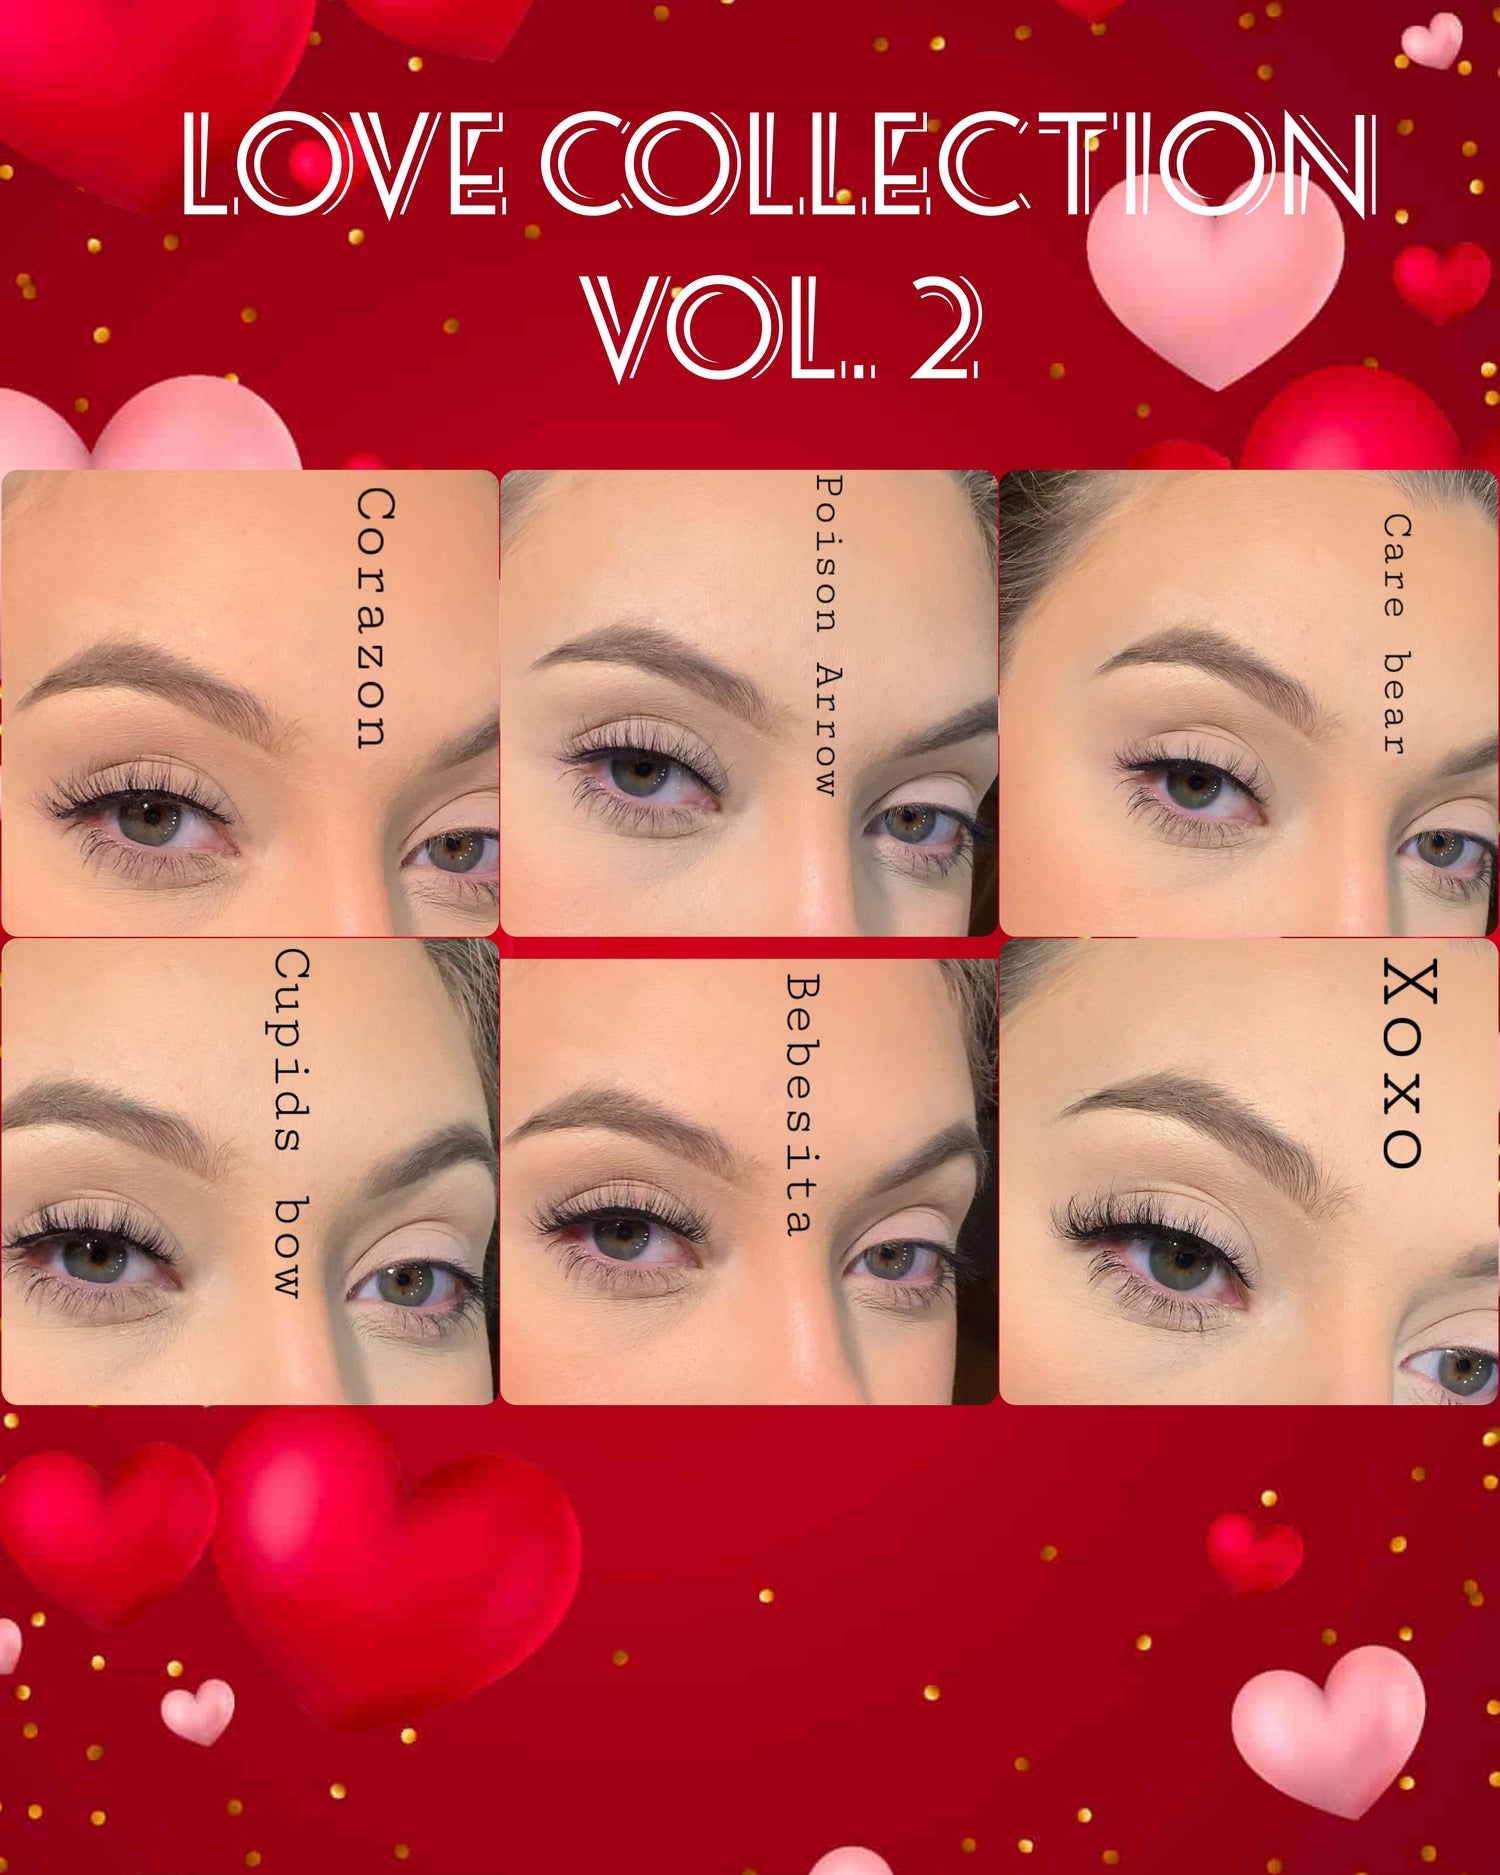 Love collection vol.2